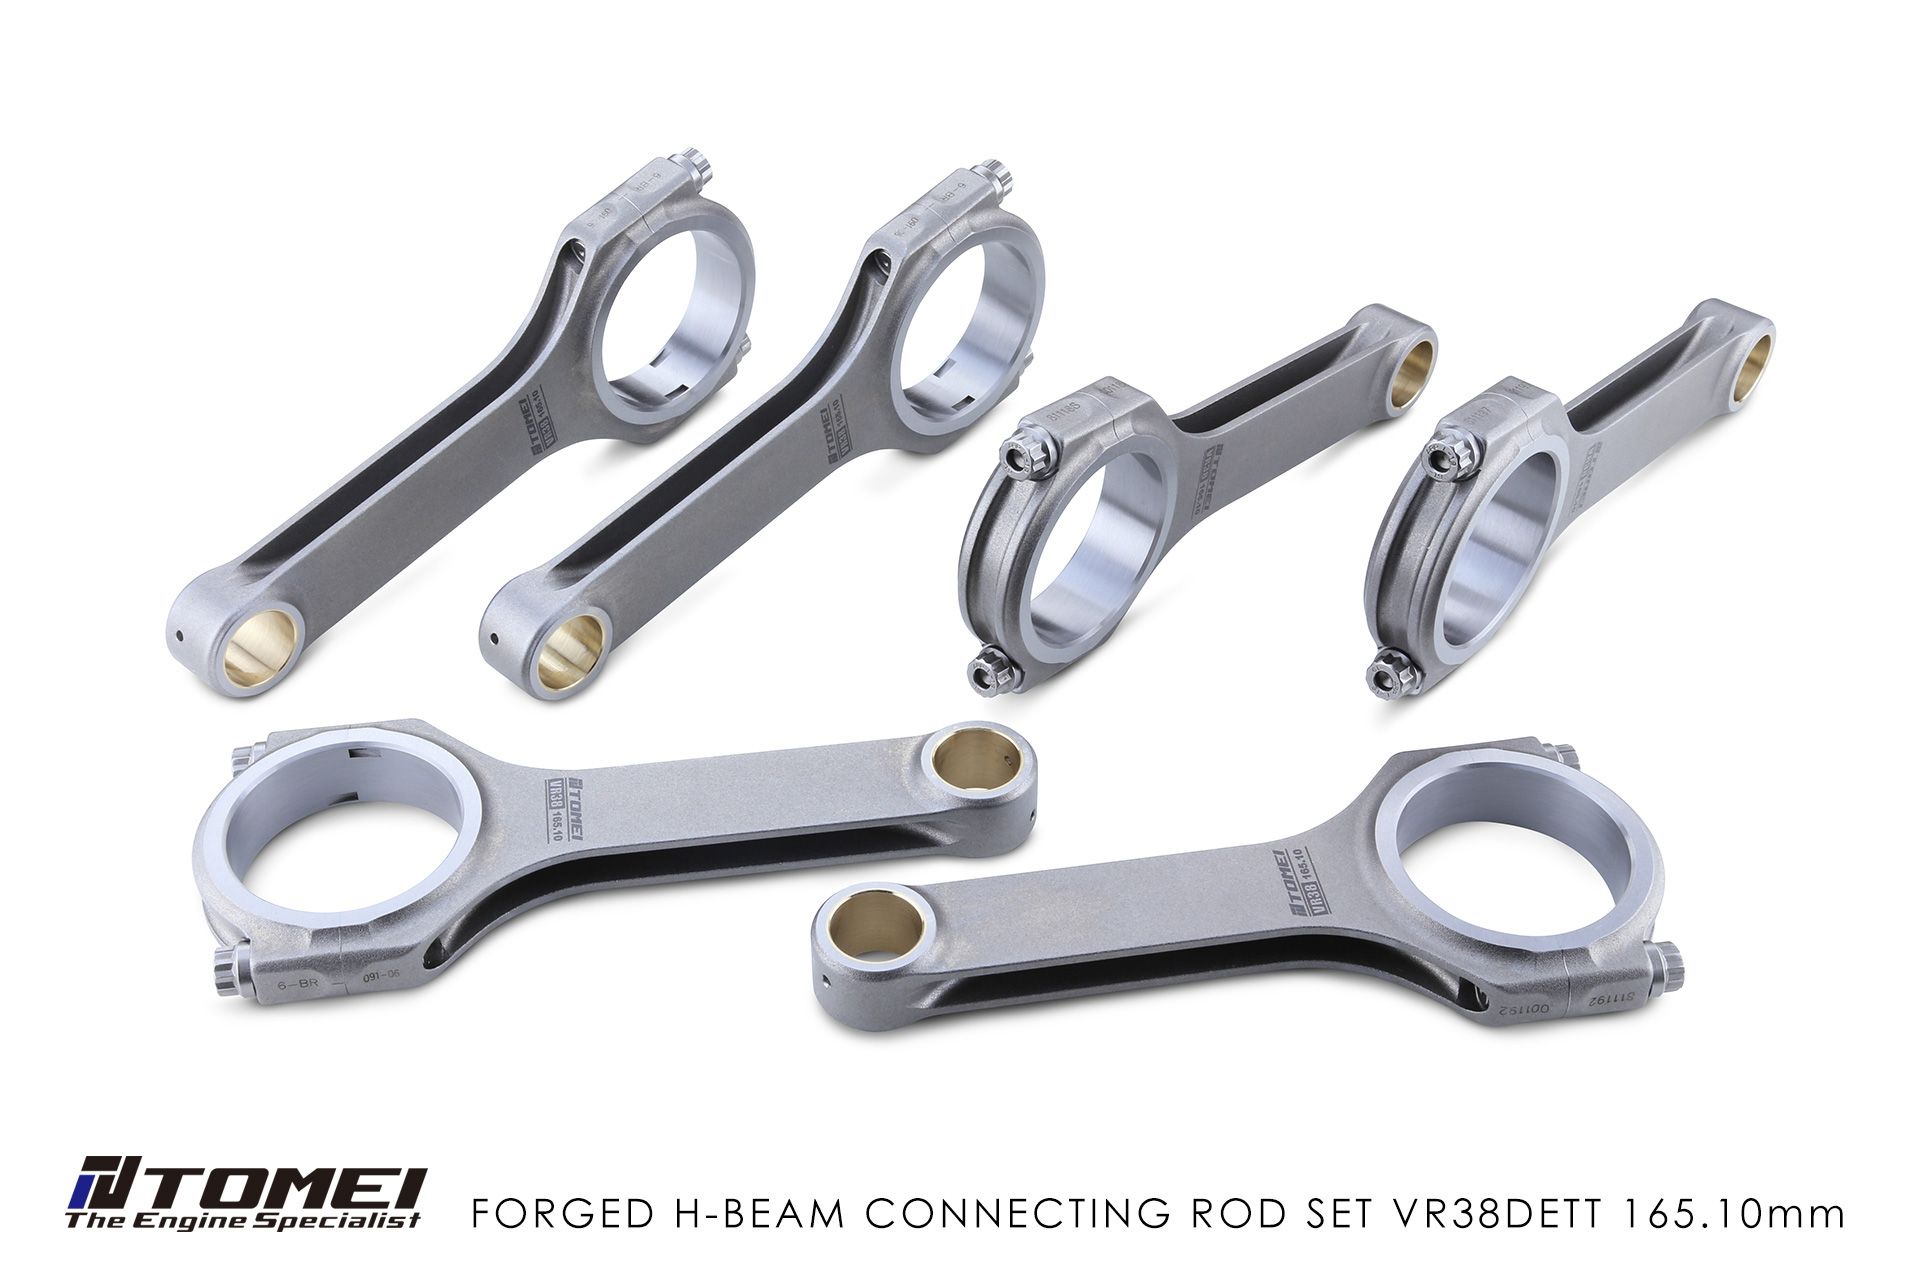 Tomei Forged H-Beam Connecting Rod Set VR38DETT 165.10mm